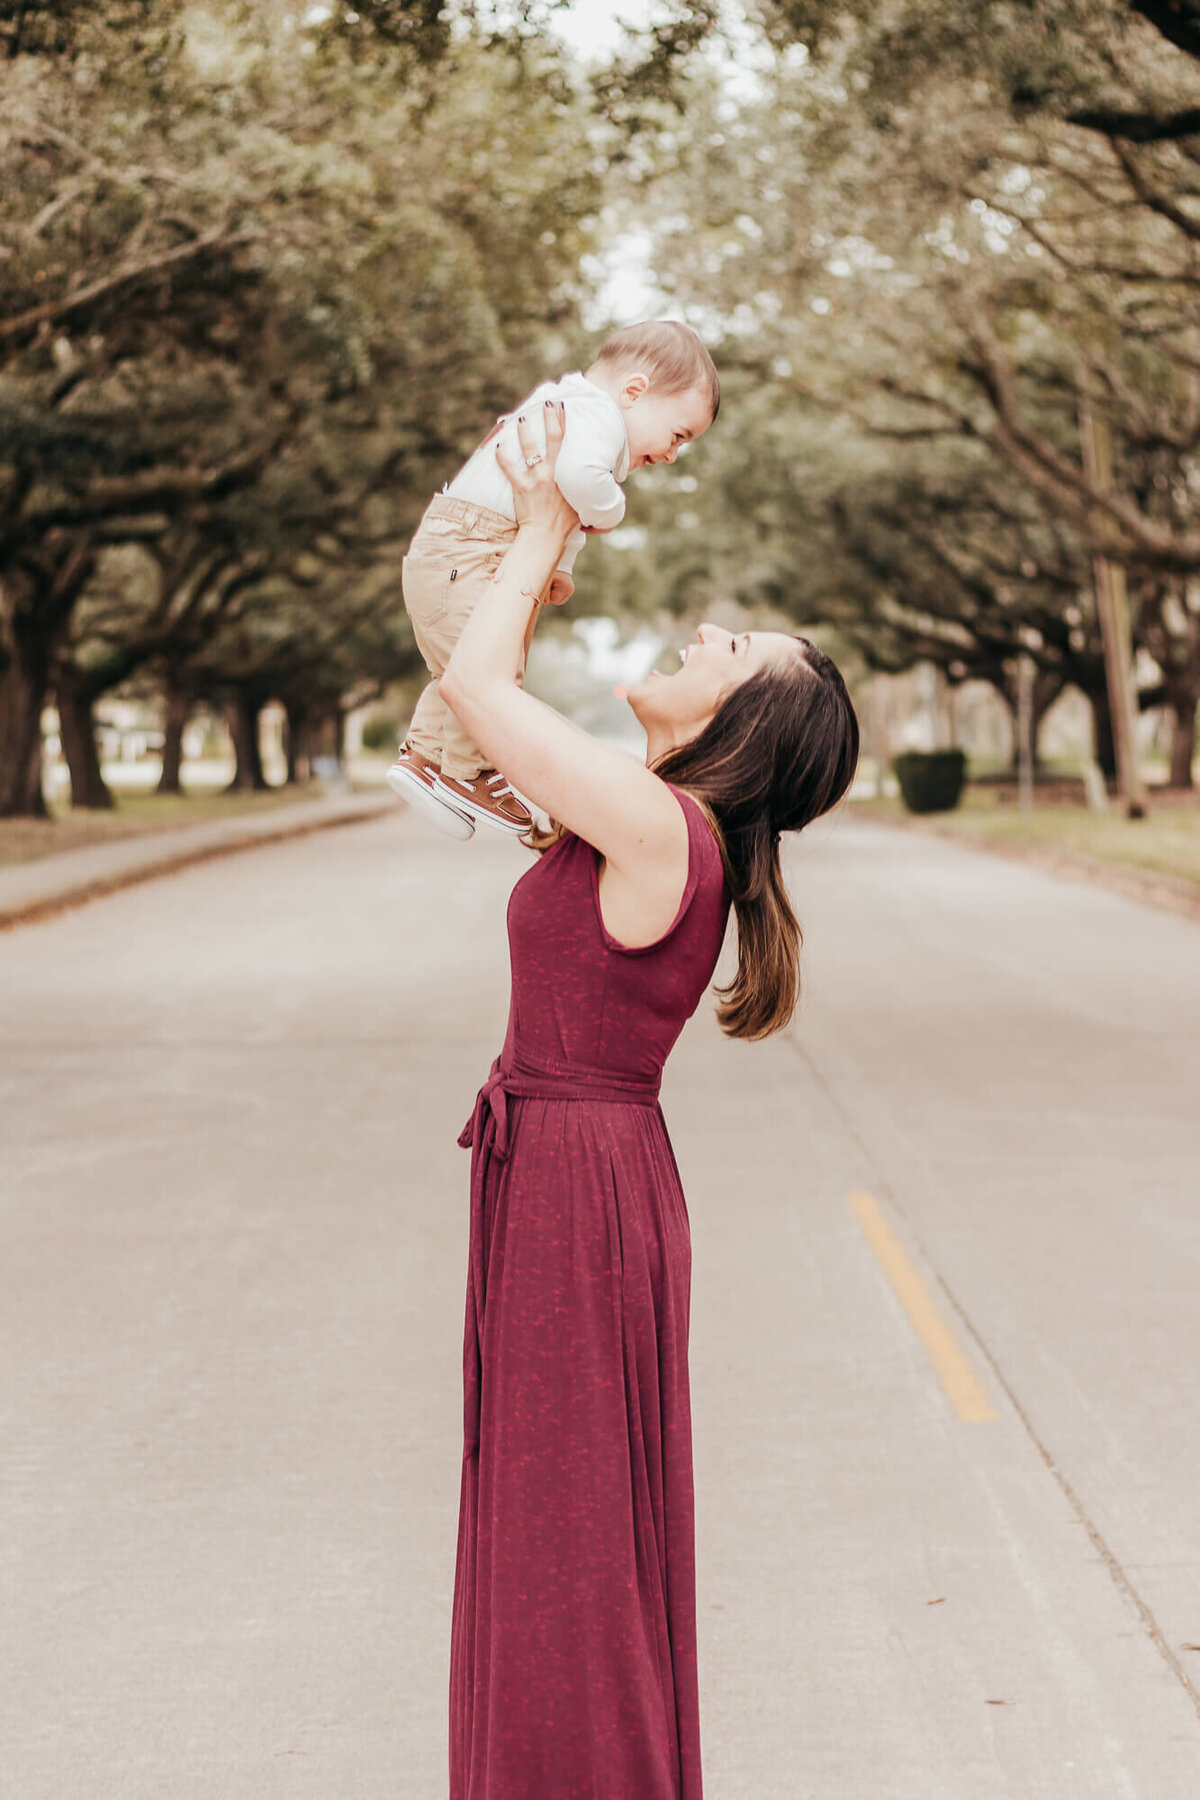 Mother tosses baby in air and giggles with him while standing in the middle of the street in Houston, Texas.